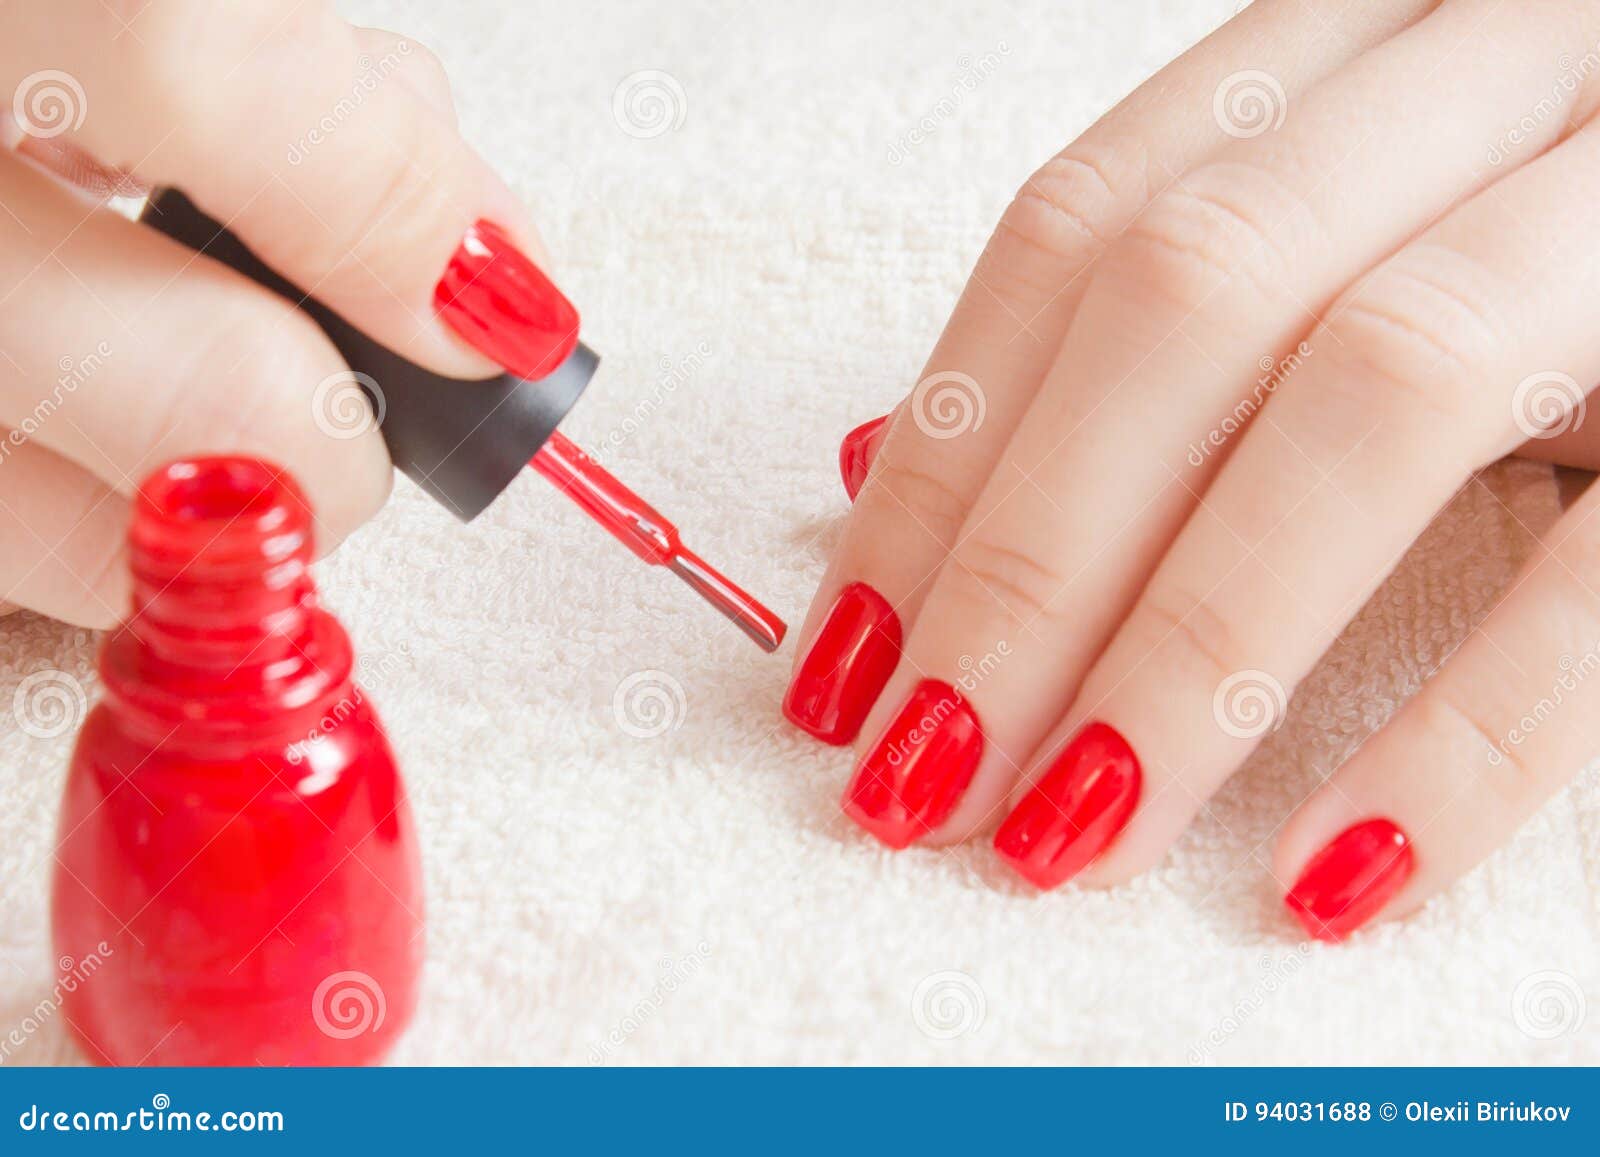 manicure - beautiful manicured woman`s nails with red nail polish on soft white towel.